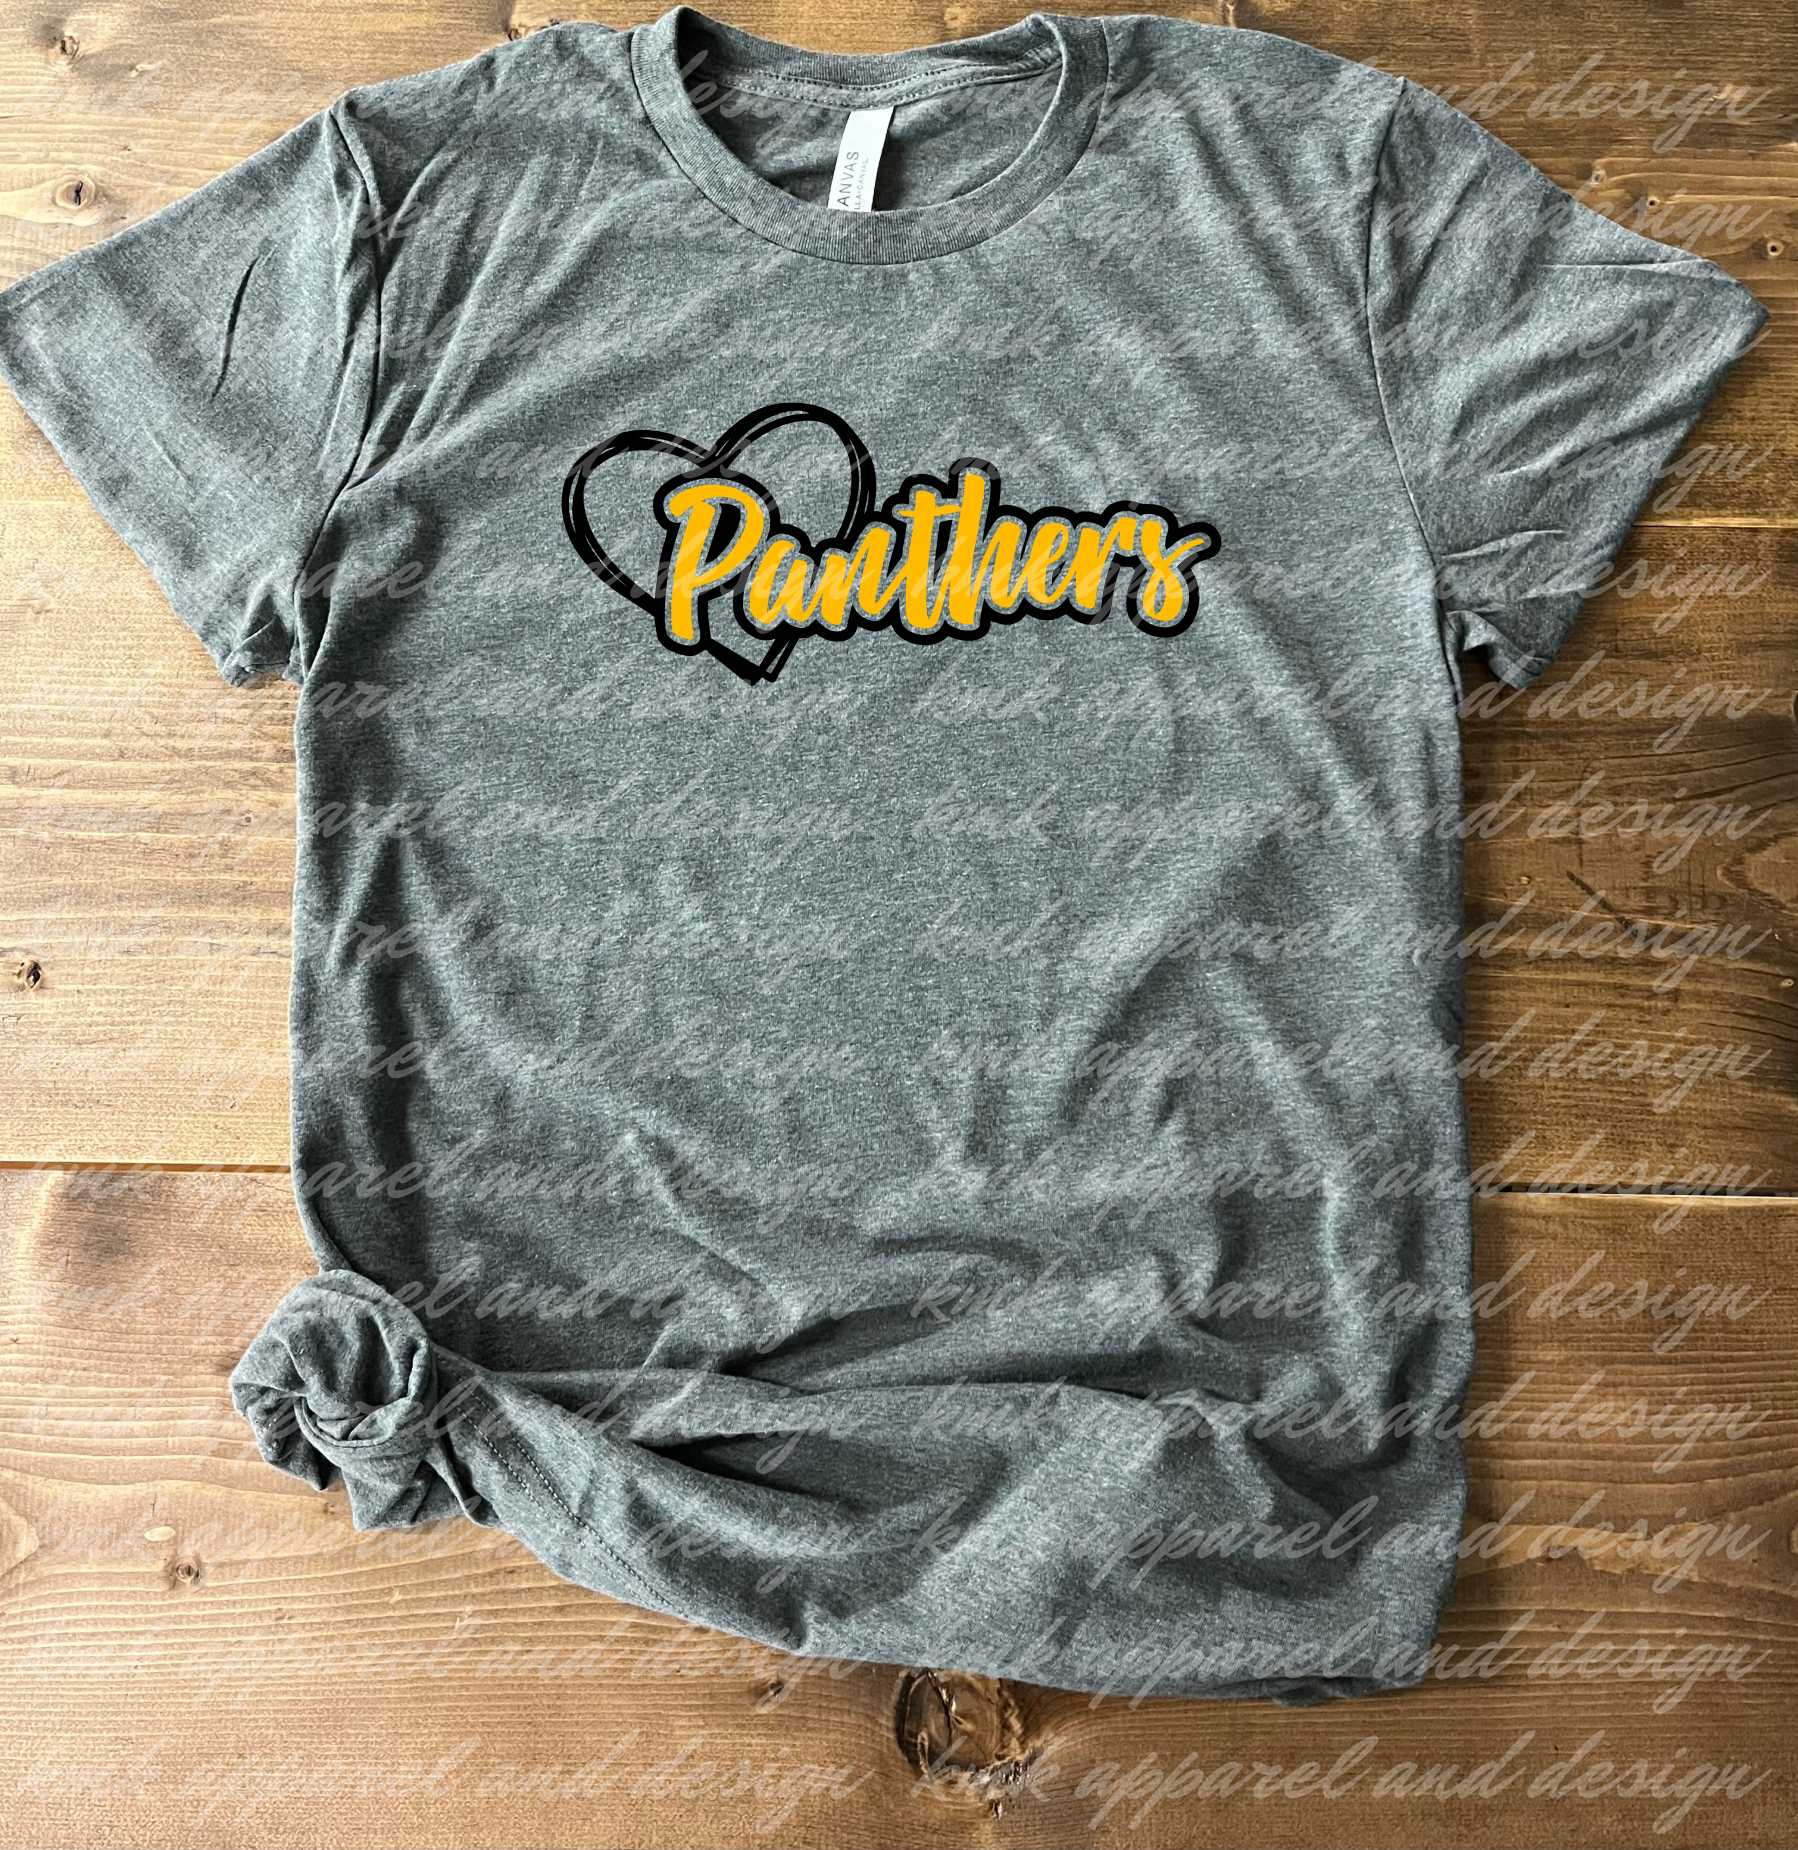 KP Panthers Sketchy Heart Panthers Script (+ options)